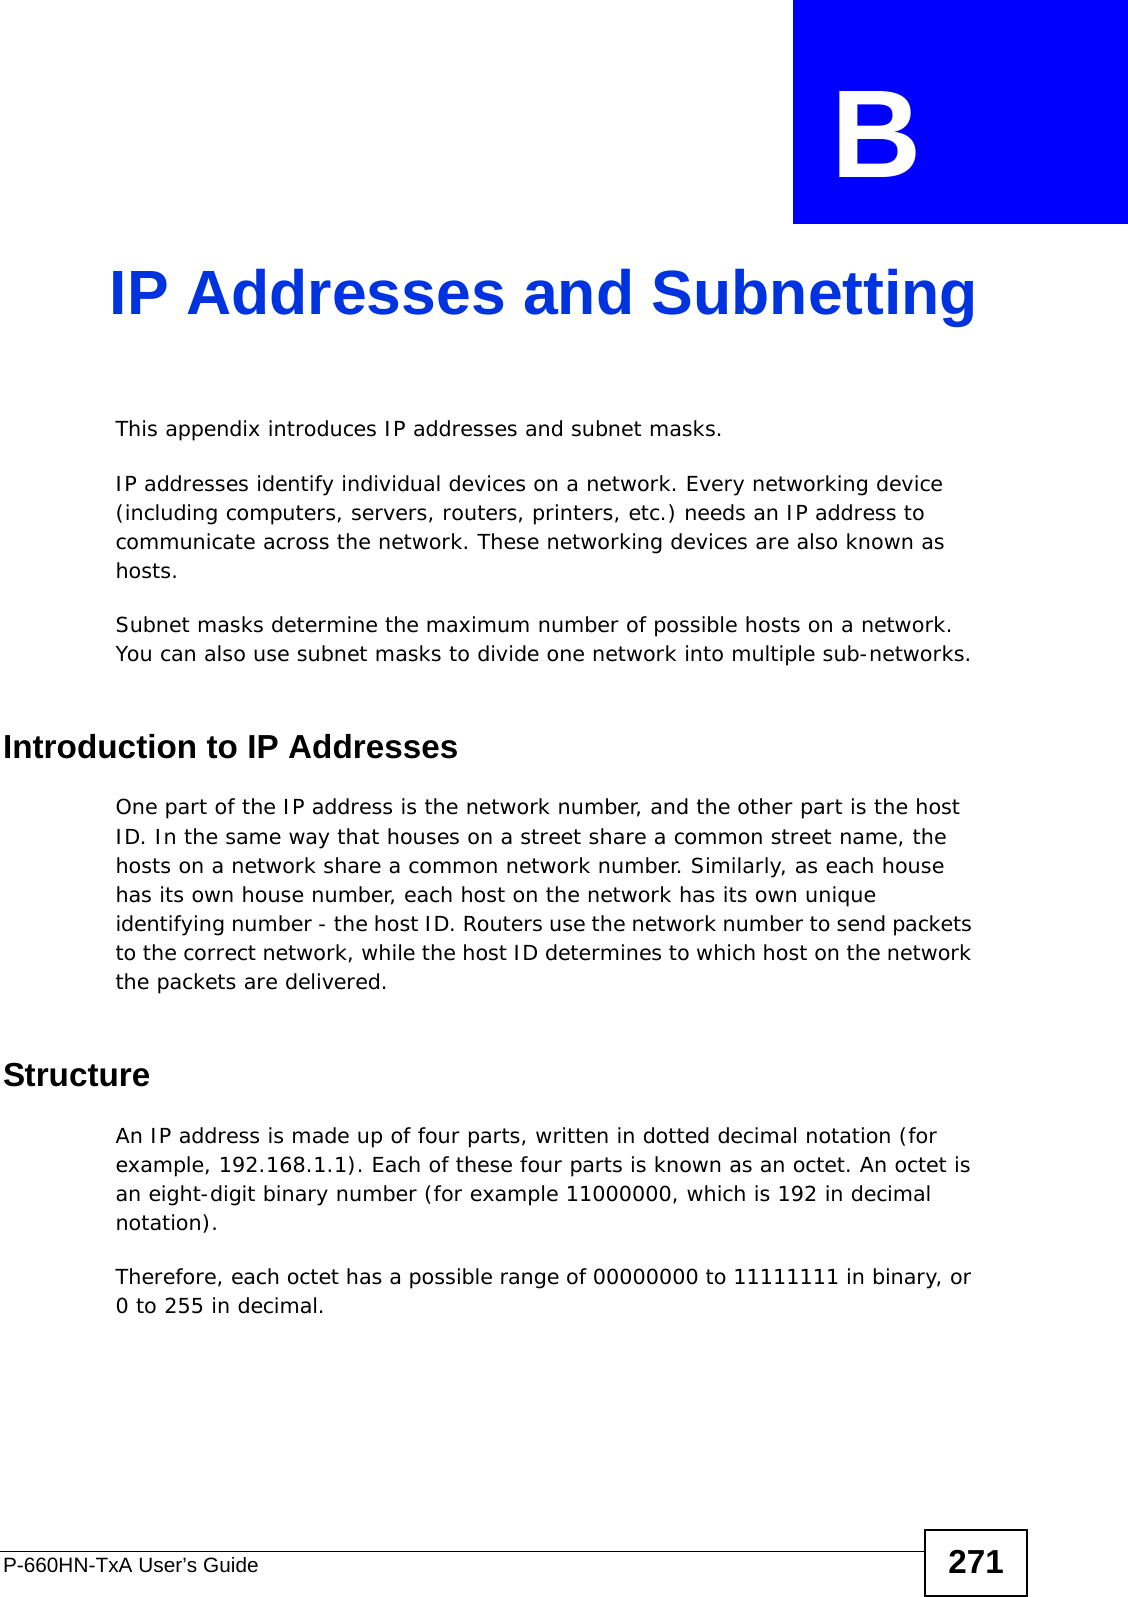 P-660HN-TxA User’s Guide 271APPENDIX  B IP Addresses and SubnettingThis appendix introduces IP addresses and subnet masks. IP addresses identify individual devices on a network. Every networking device (including computers, servers, routers, printers, etc.) needs an IP address to communicate across the network. These networking devices are also known as hosts.Subnet masks determine the maximum number of possible hosts on a network. You can also use subnet masks to divide one network into multiple sub-networks.Introduction to IP AddressesOne part of the IP address is the network number, and the other part is the host ID. In the same way that houses on a street share a common street name, the hosts on a network share a common network number. Similarly, as each house has its own house number, each host on the network has its own unique identifying number - the host ID. Routers use the network number to send packets to the correct network, while the host ID determines to which host on the network the packets are delivered.StructureAn IP address is made up of four parts, written in dotted decimal notation (for example, 192.168.1.1). Each of these four parts is known as an octet. An octet is an eight-digit binary number (for example 11000000, which is 192 in decimal notation). Therefore, each octet has a possible range of 00000000 to 11111111 in binary, or 0 to 255 in decimal.